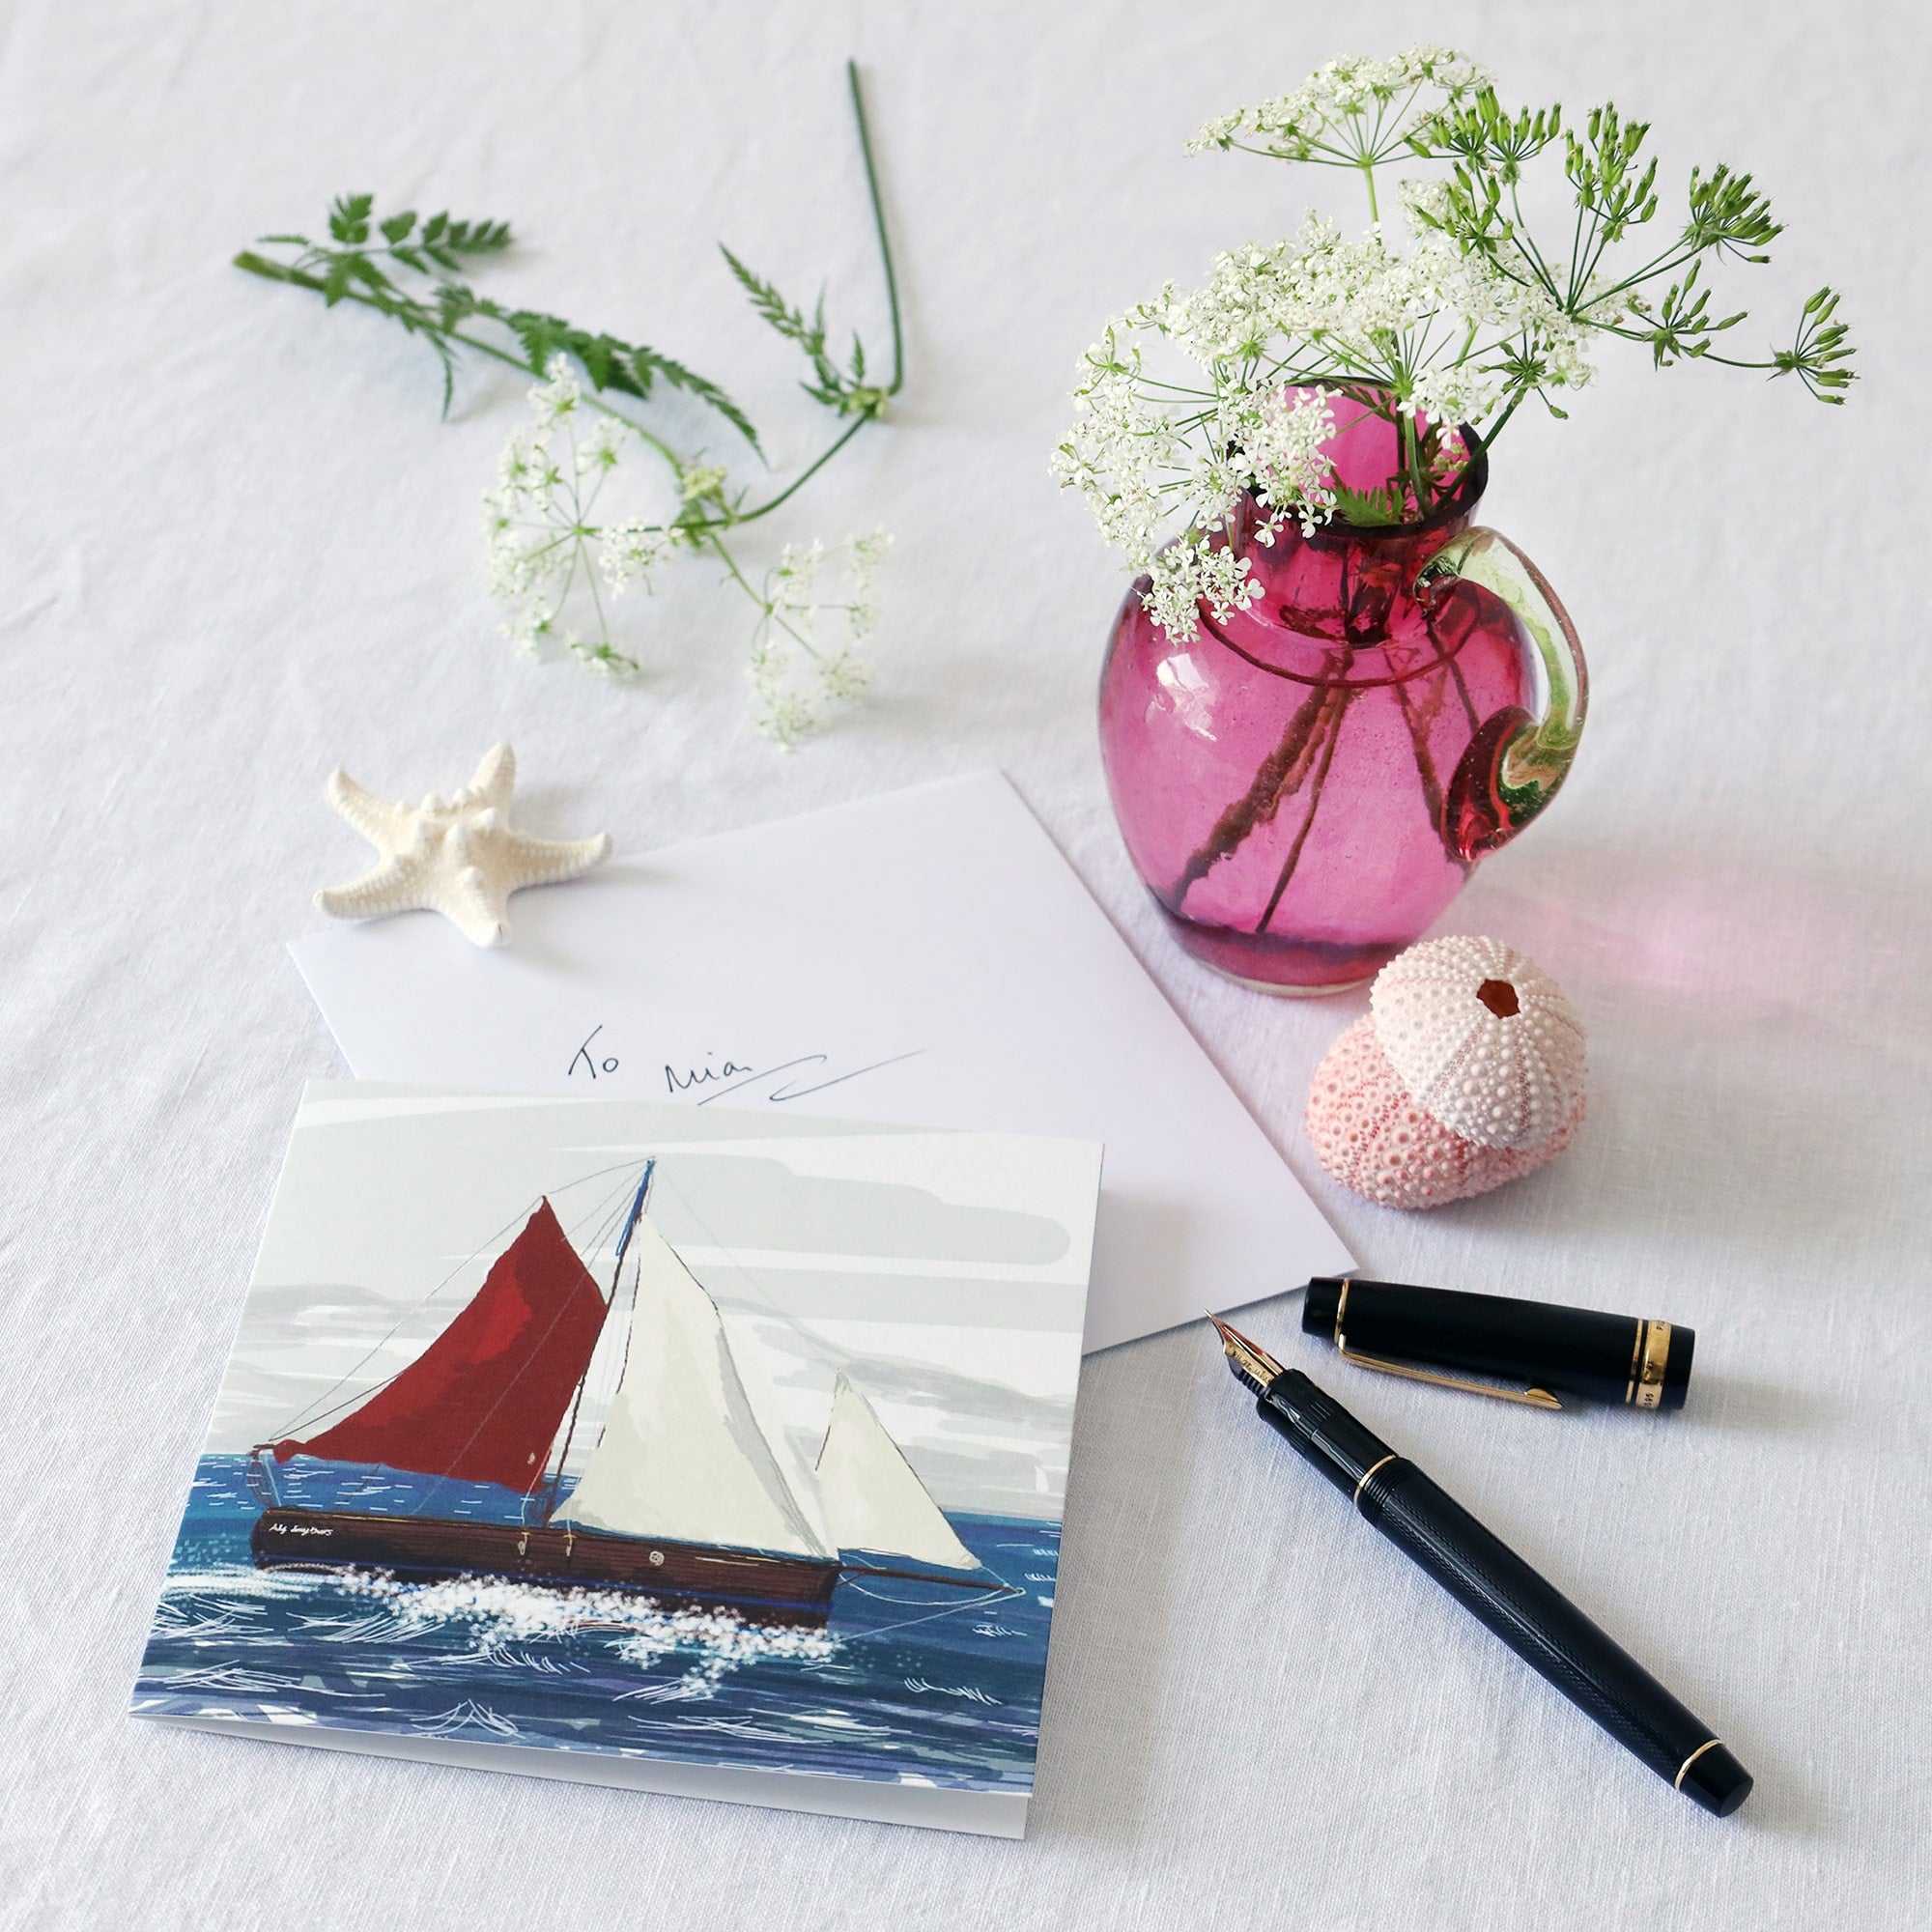 greeting card with illustration of a cornish crabber boat sailing in the sea lying on a white table cloth with a fountain pen, hand written envelope shells and a small cranberry glass jug with wild flowers in